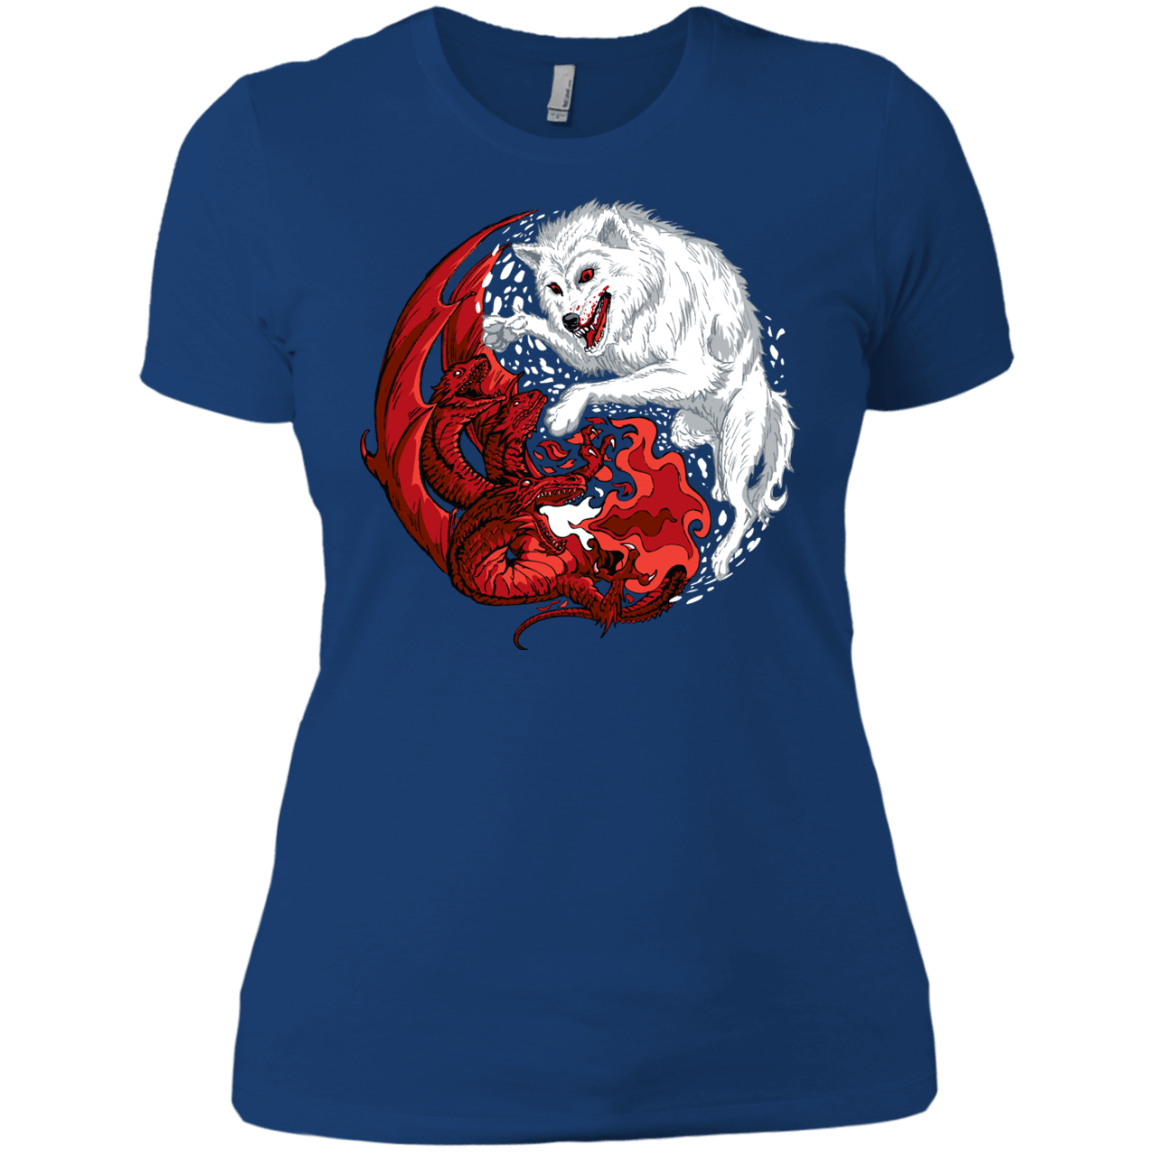 T-Shirts Royal / X-Small Ice and Fire Women's Premium T-Shirt